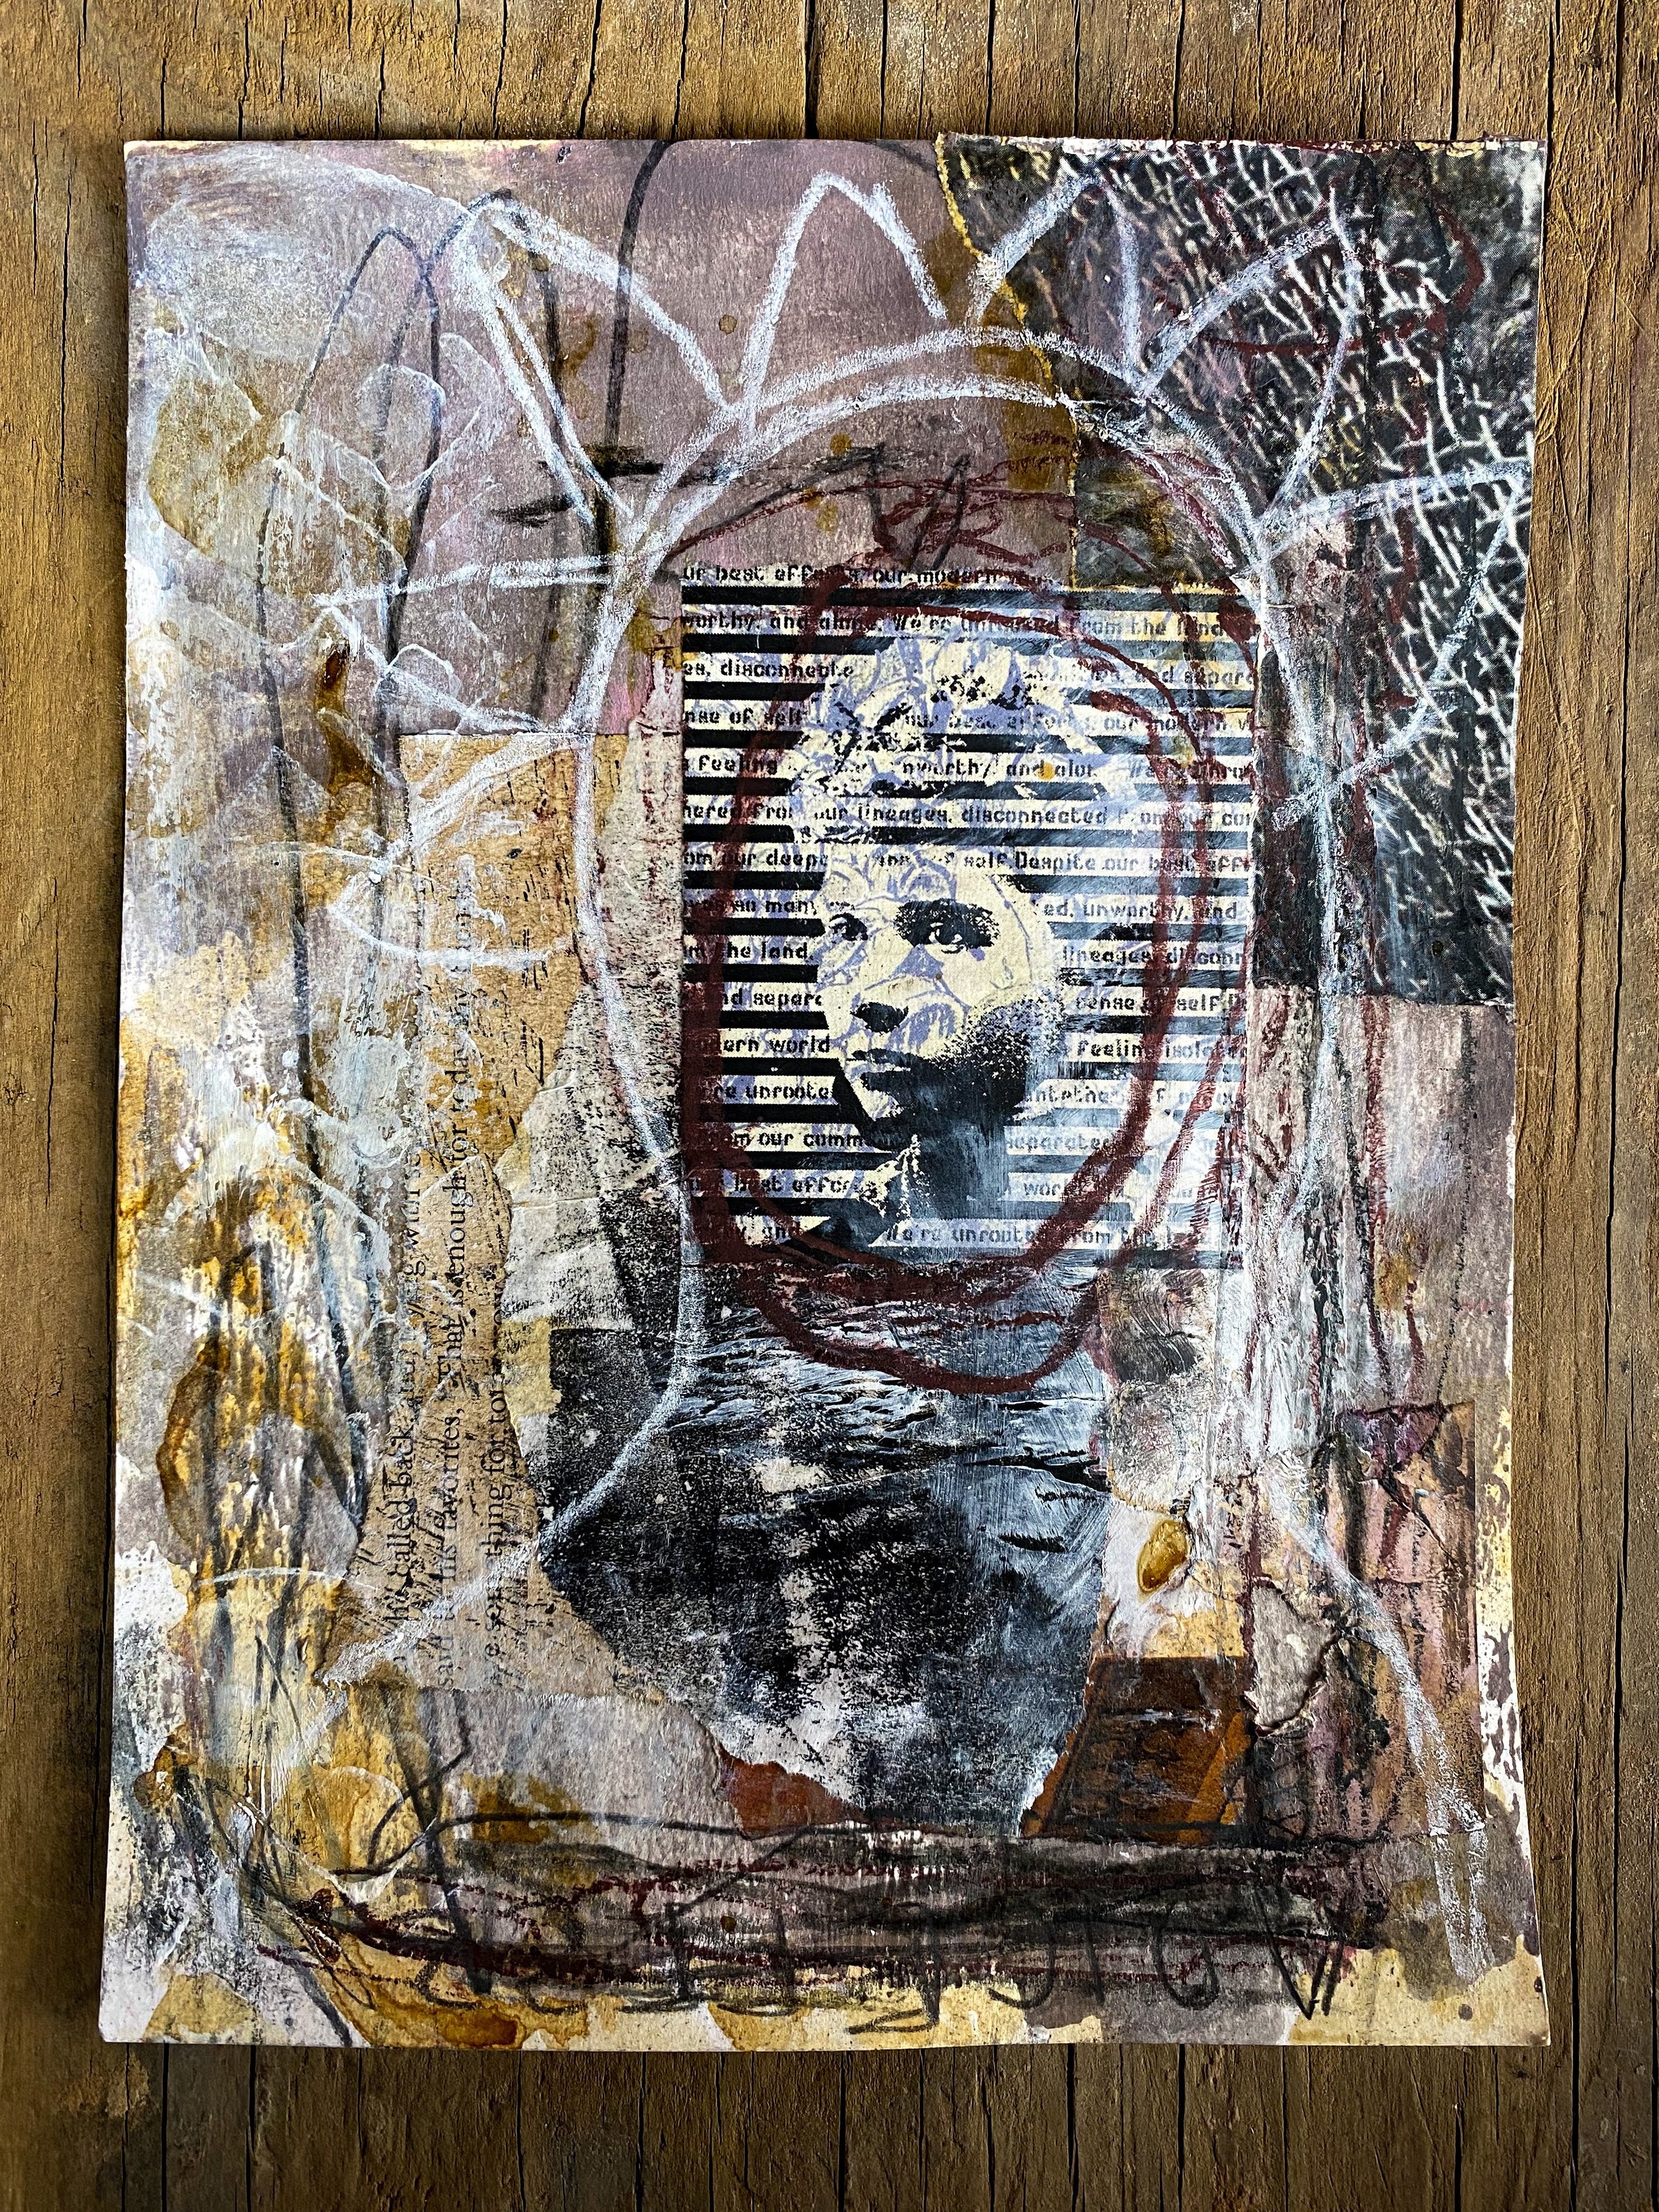 Disconnected - Original Mixed Media Collage